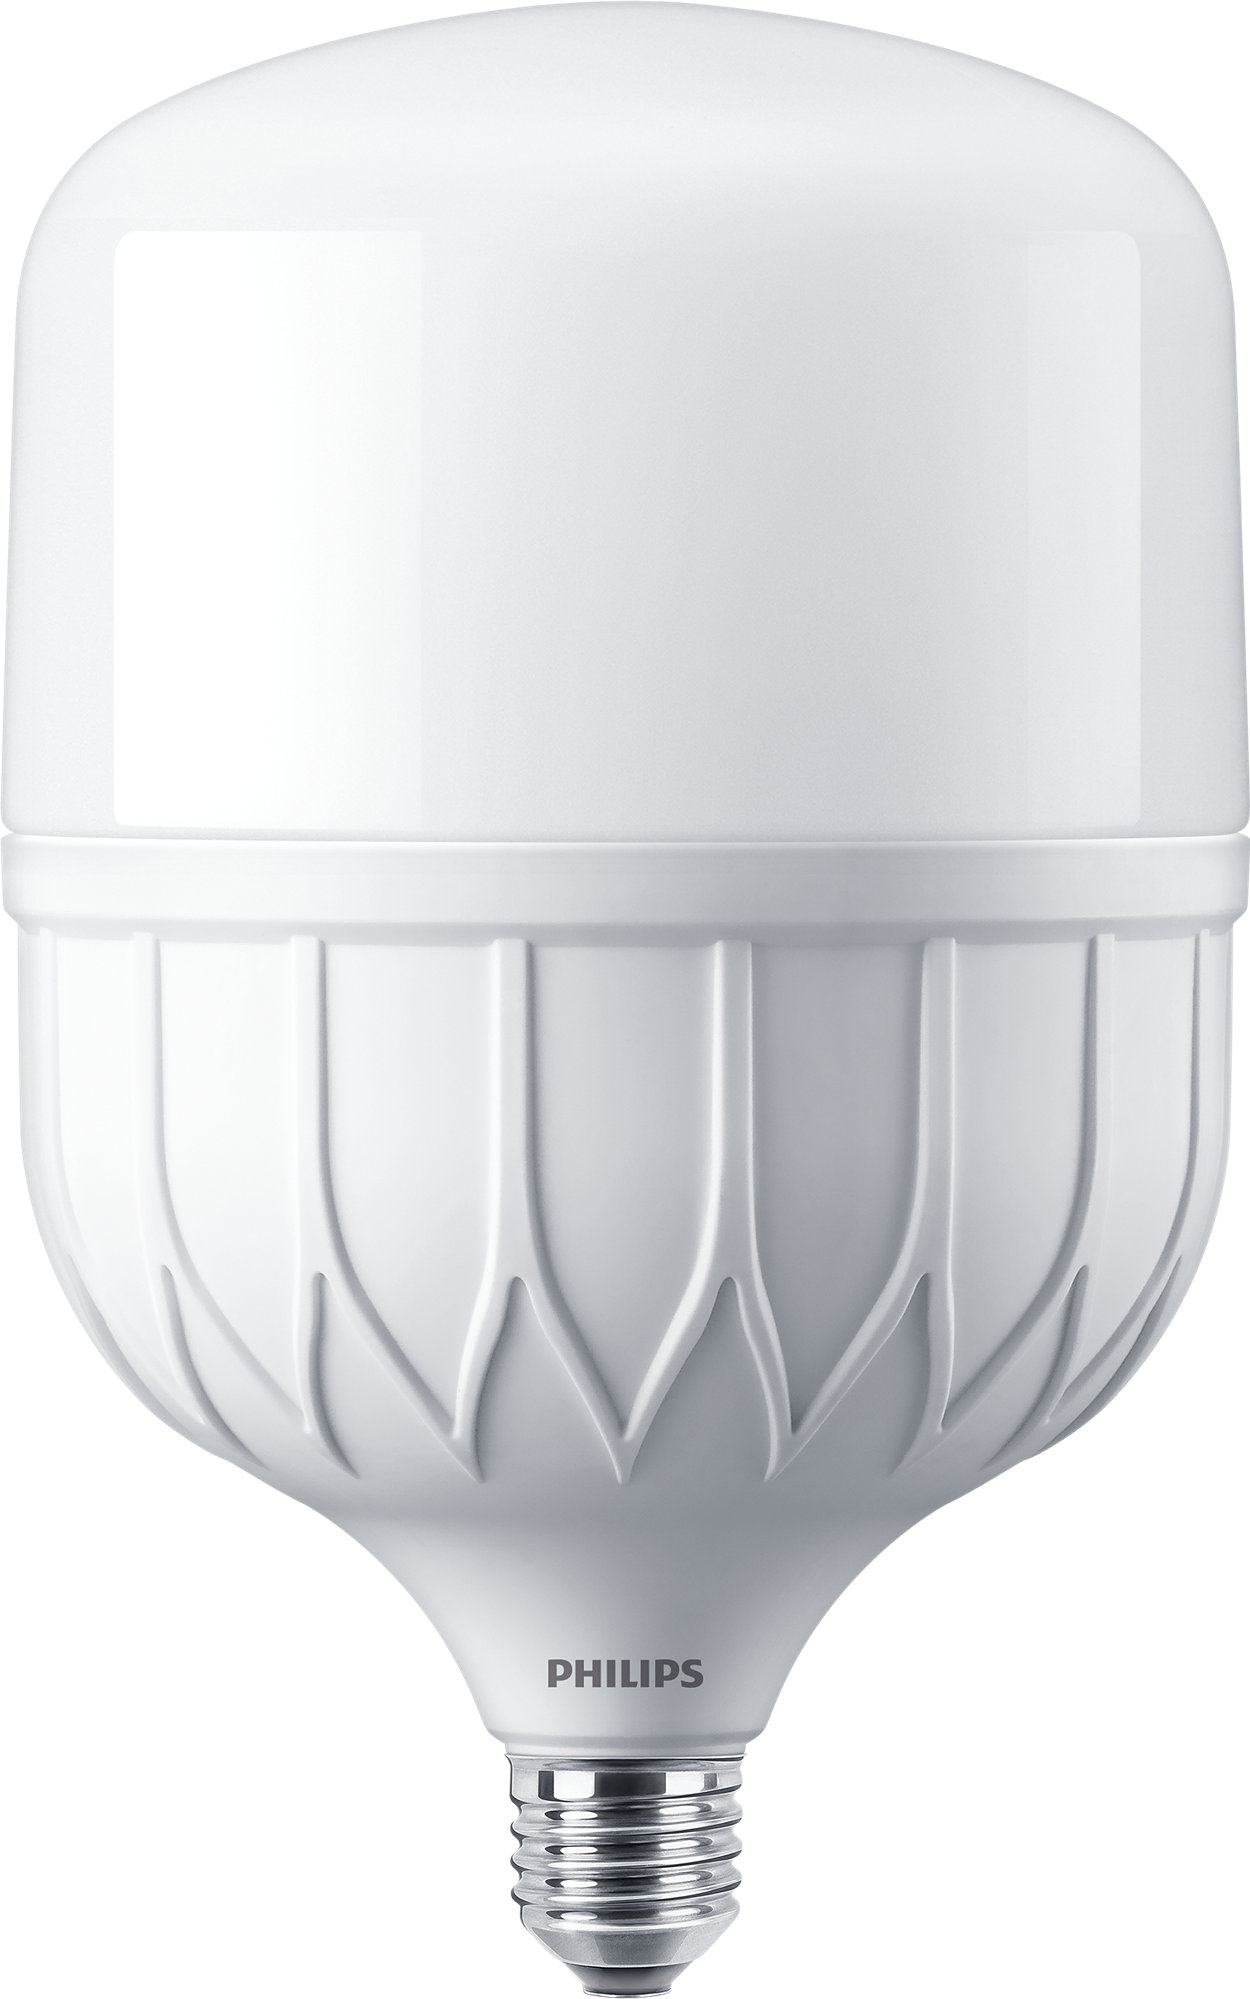 Ideal for HPI/SON/HPL LED replacement in Highbay application